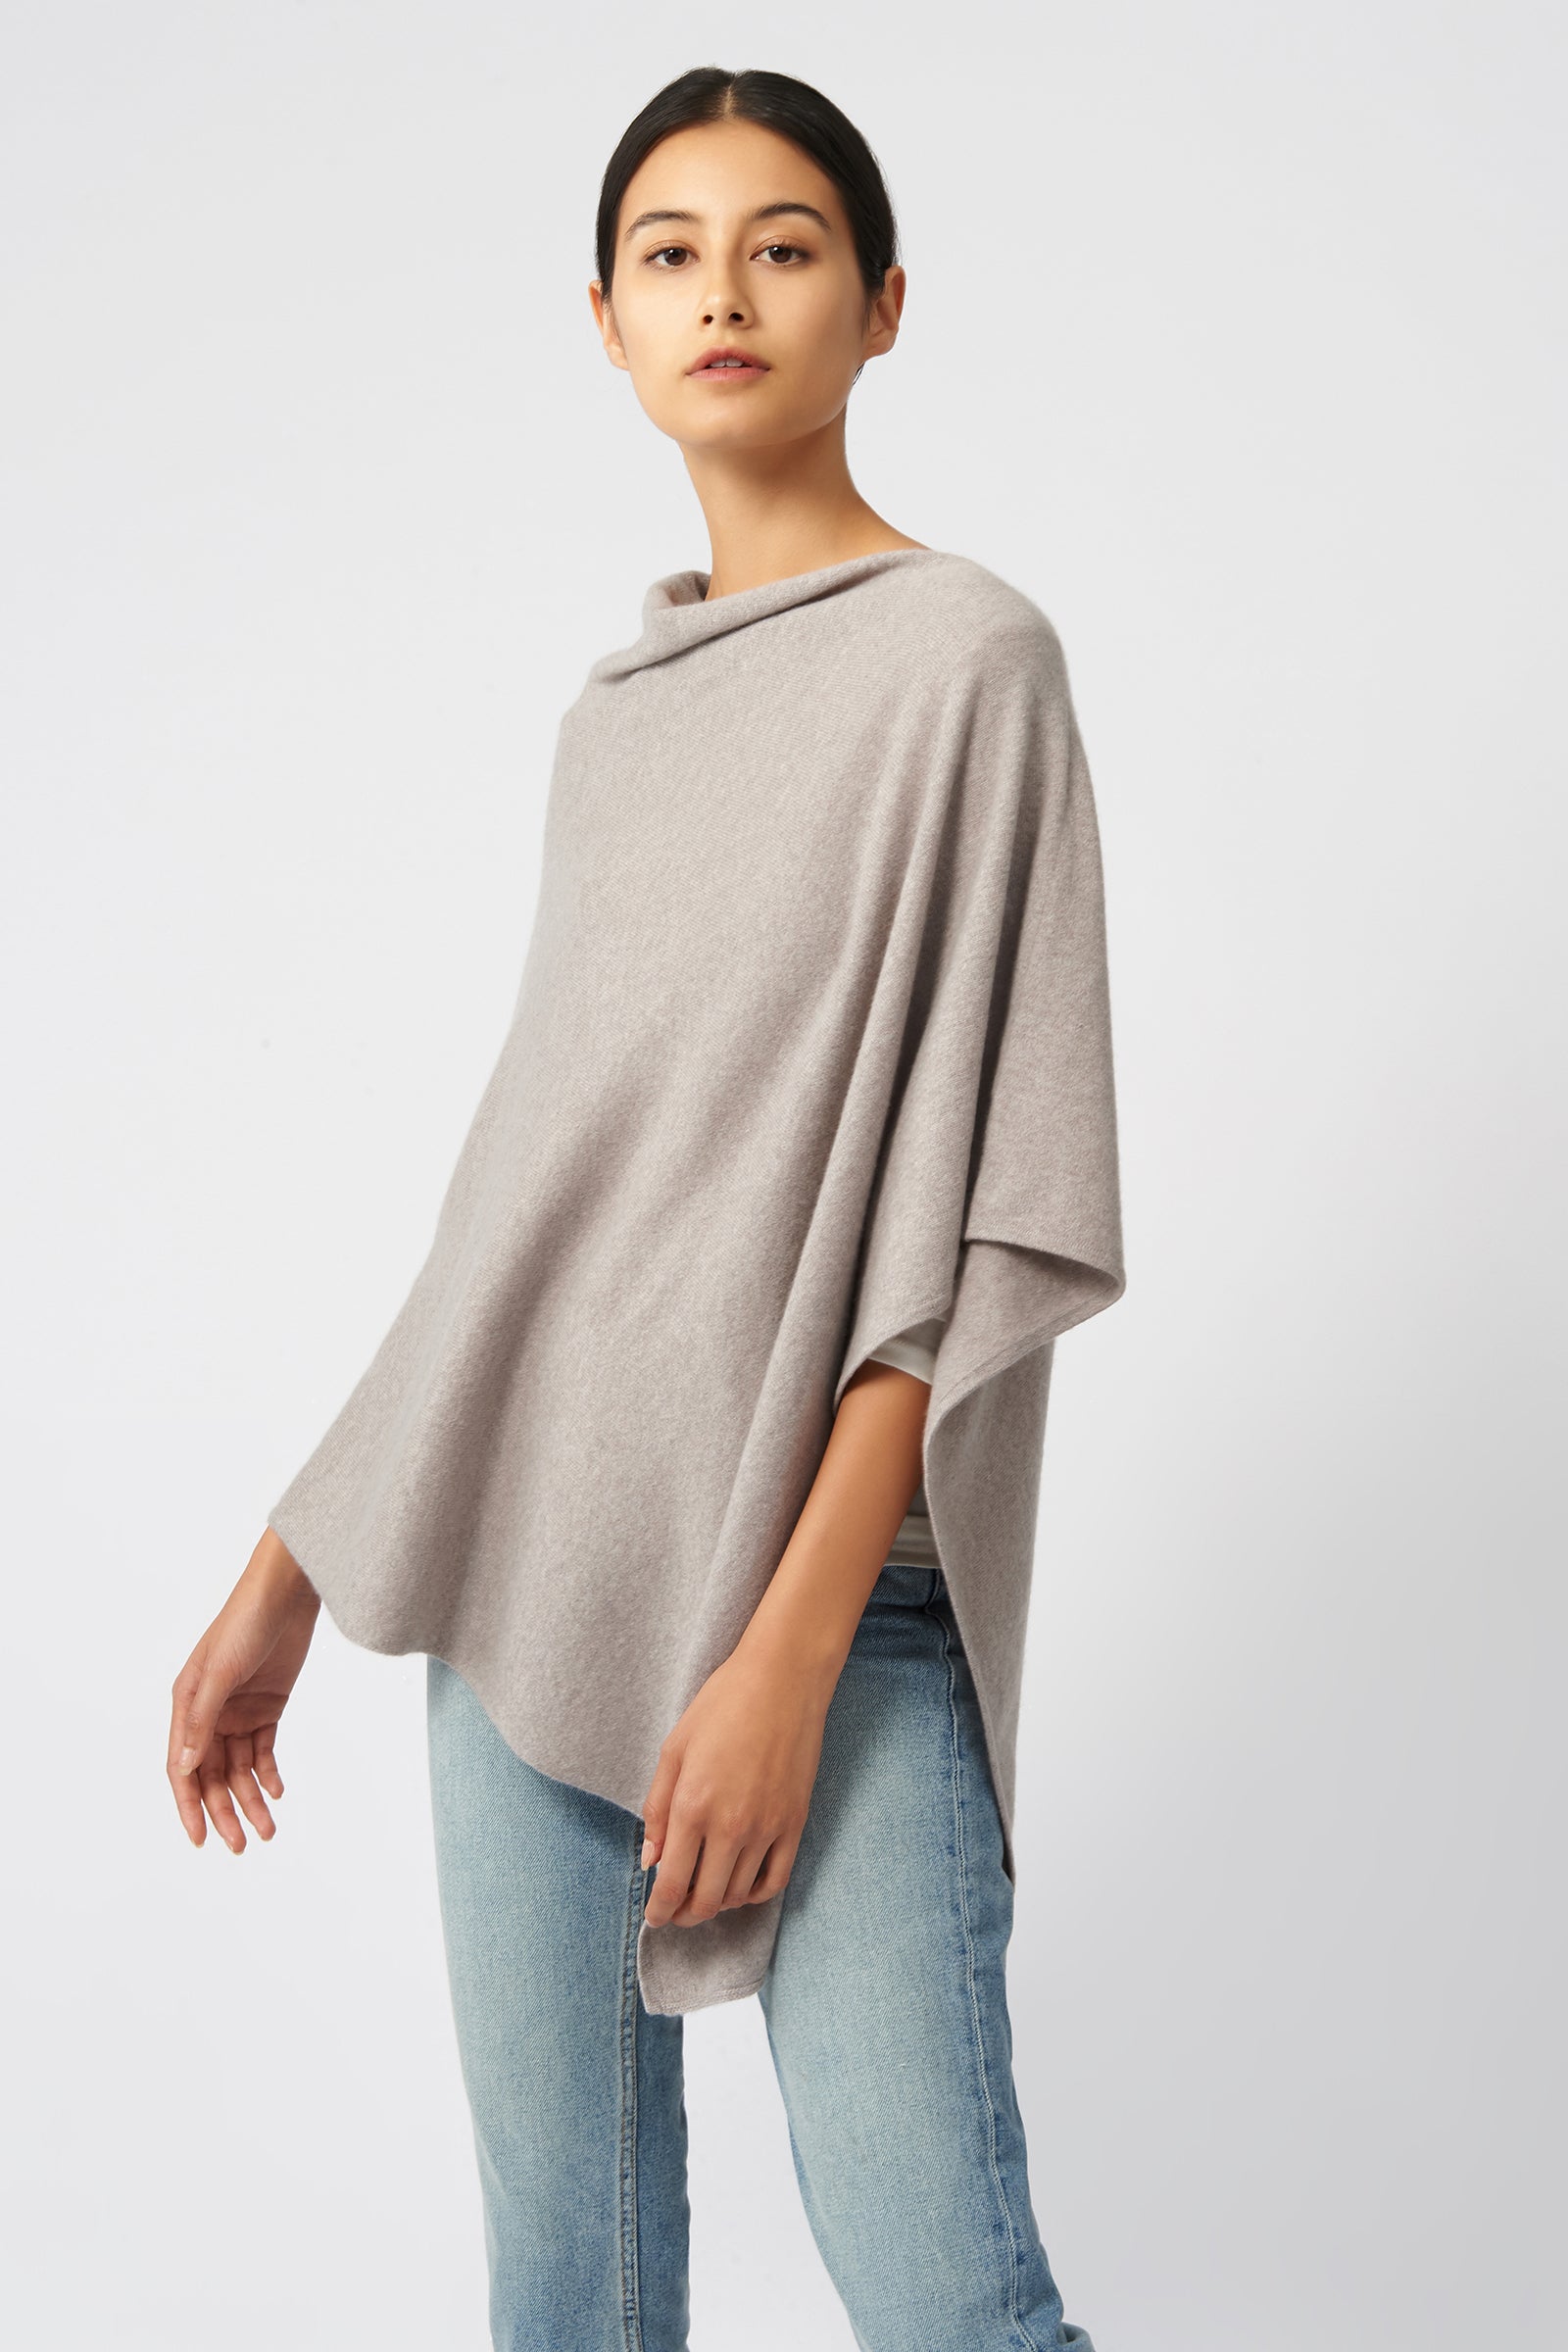 Kal Rieman Cashmere Poncho in Drift on Model Front Side View